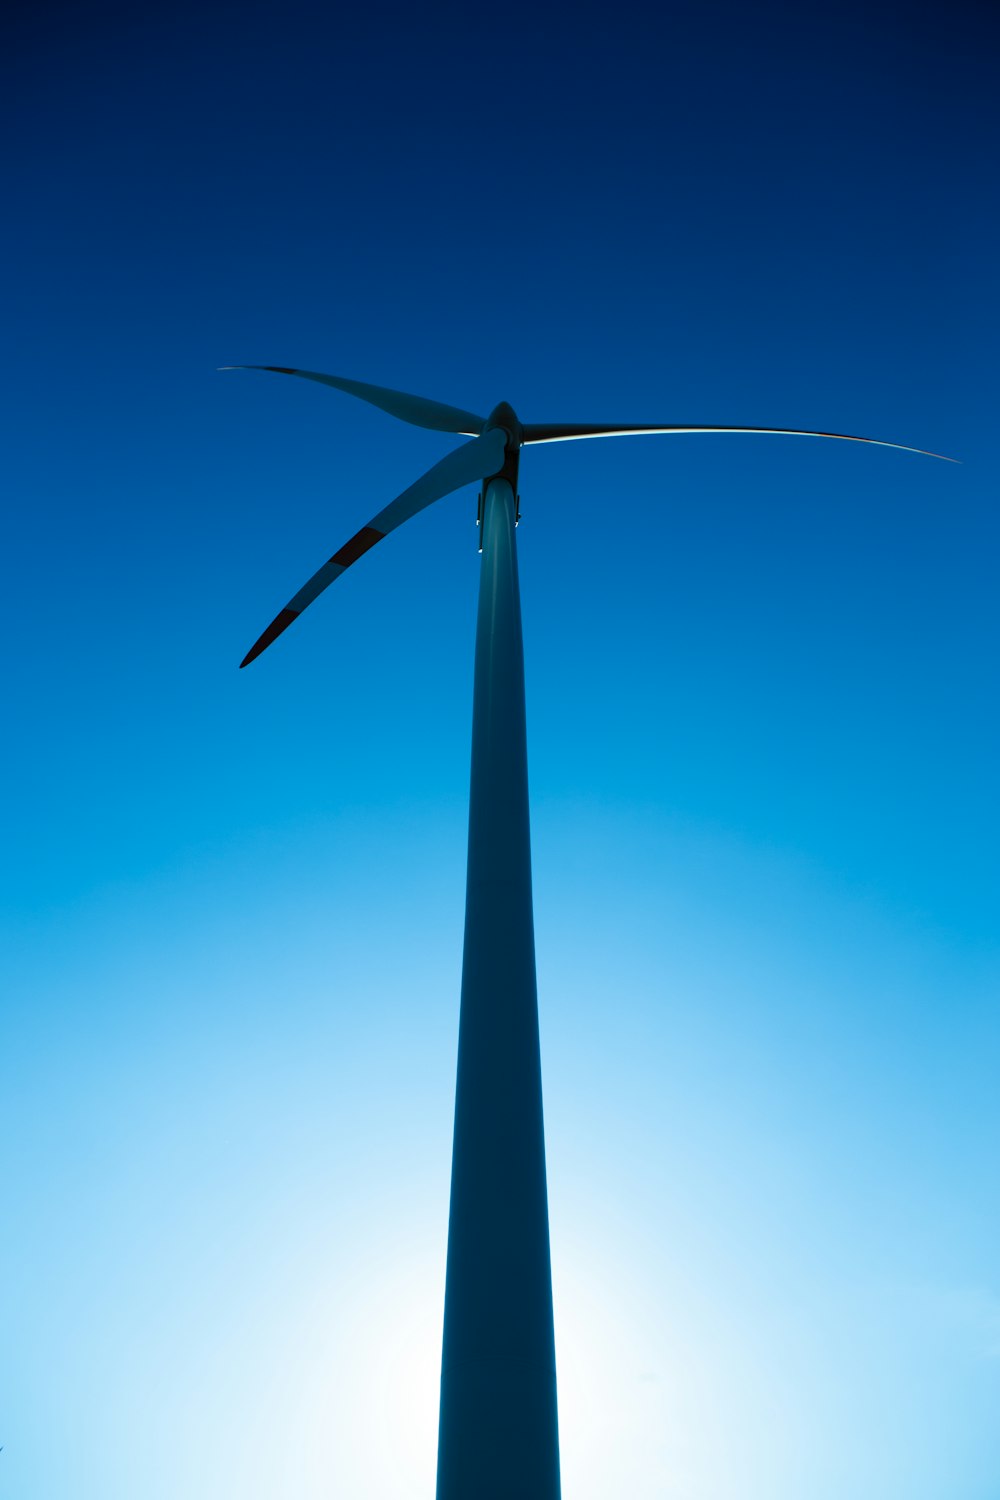 a wind turbine is silhouetted against a blue sky